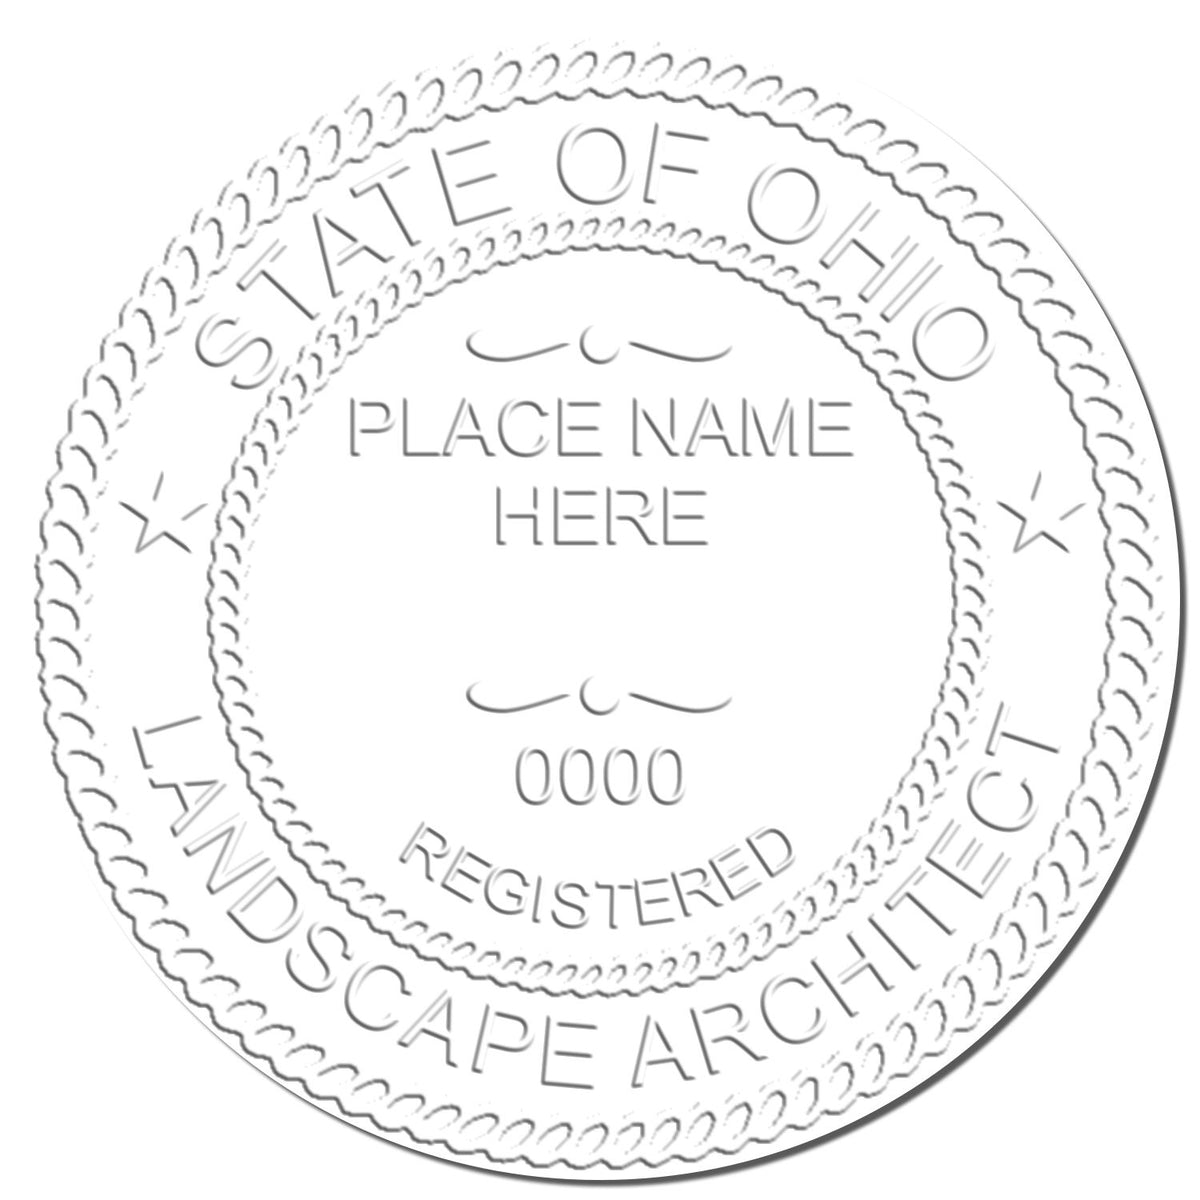 This paper is stamped with a sample imprint of the Soft Pocket Ohio Landscape Architect Embosser, signifying its quality and reliability.